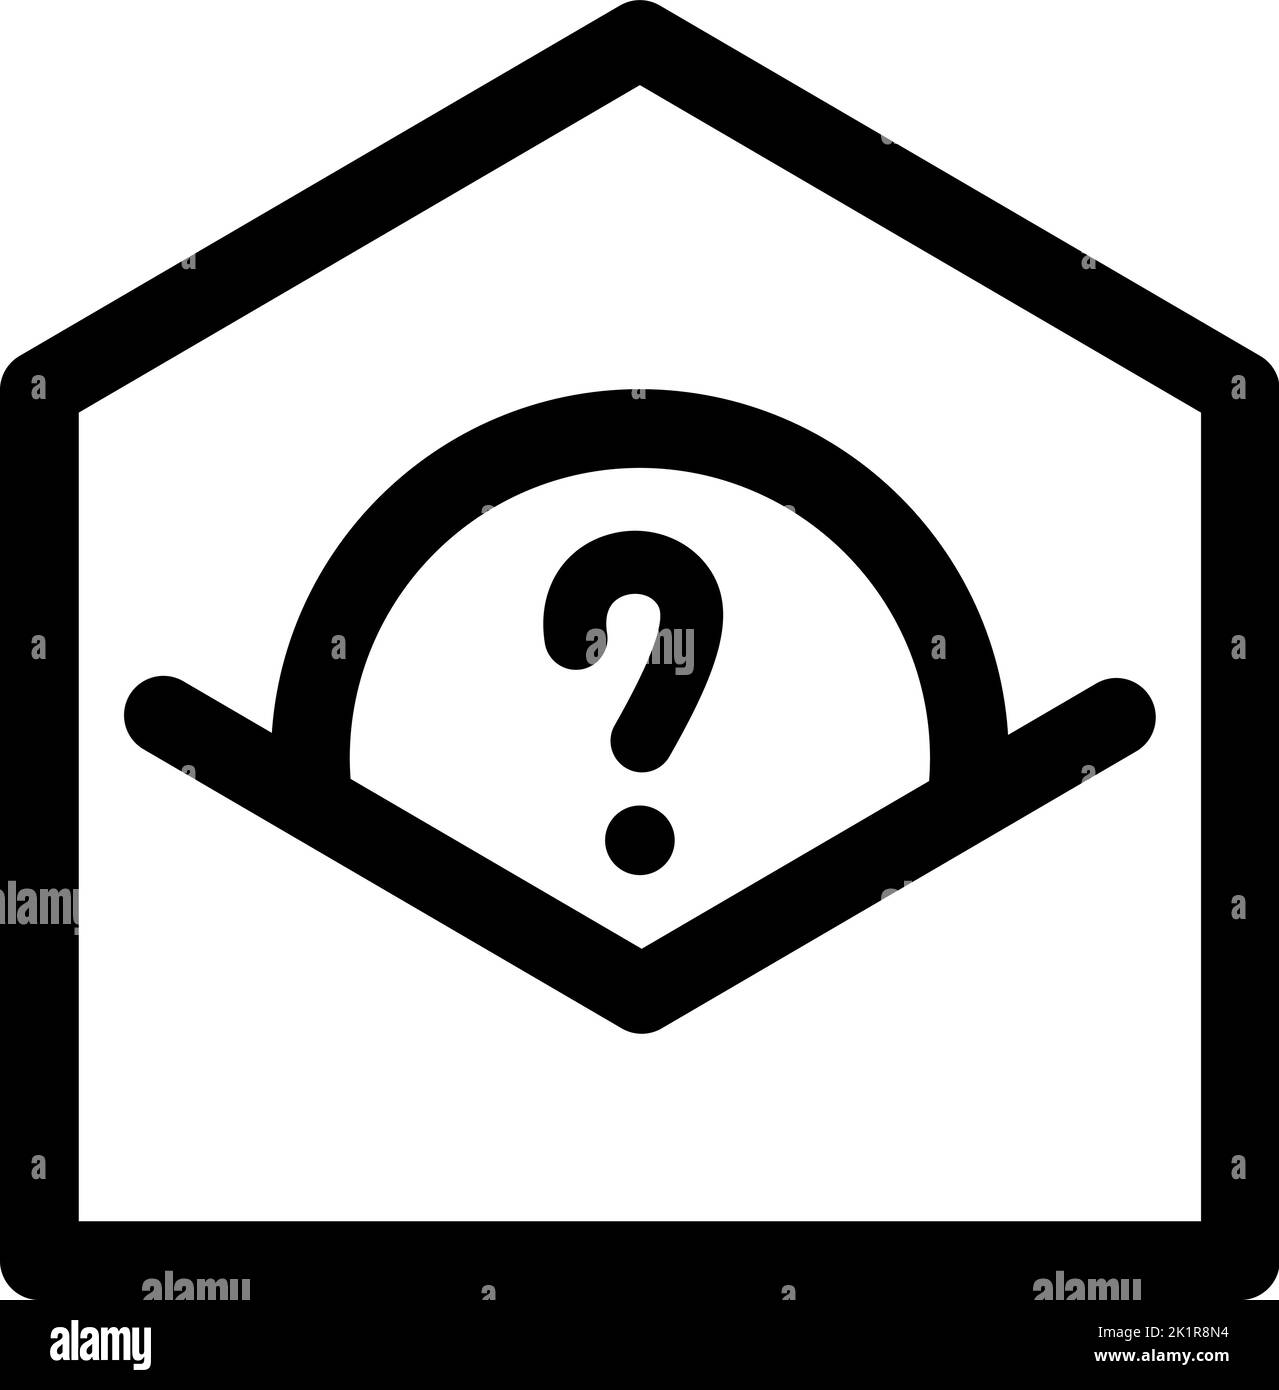 Mail with Question Mark monoline vector logo icon. Flat sign isolated on white background. Editable file illustration. Stock Vector